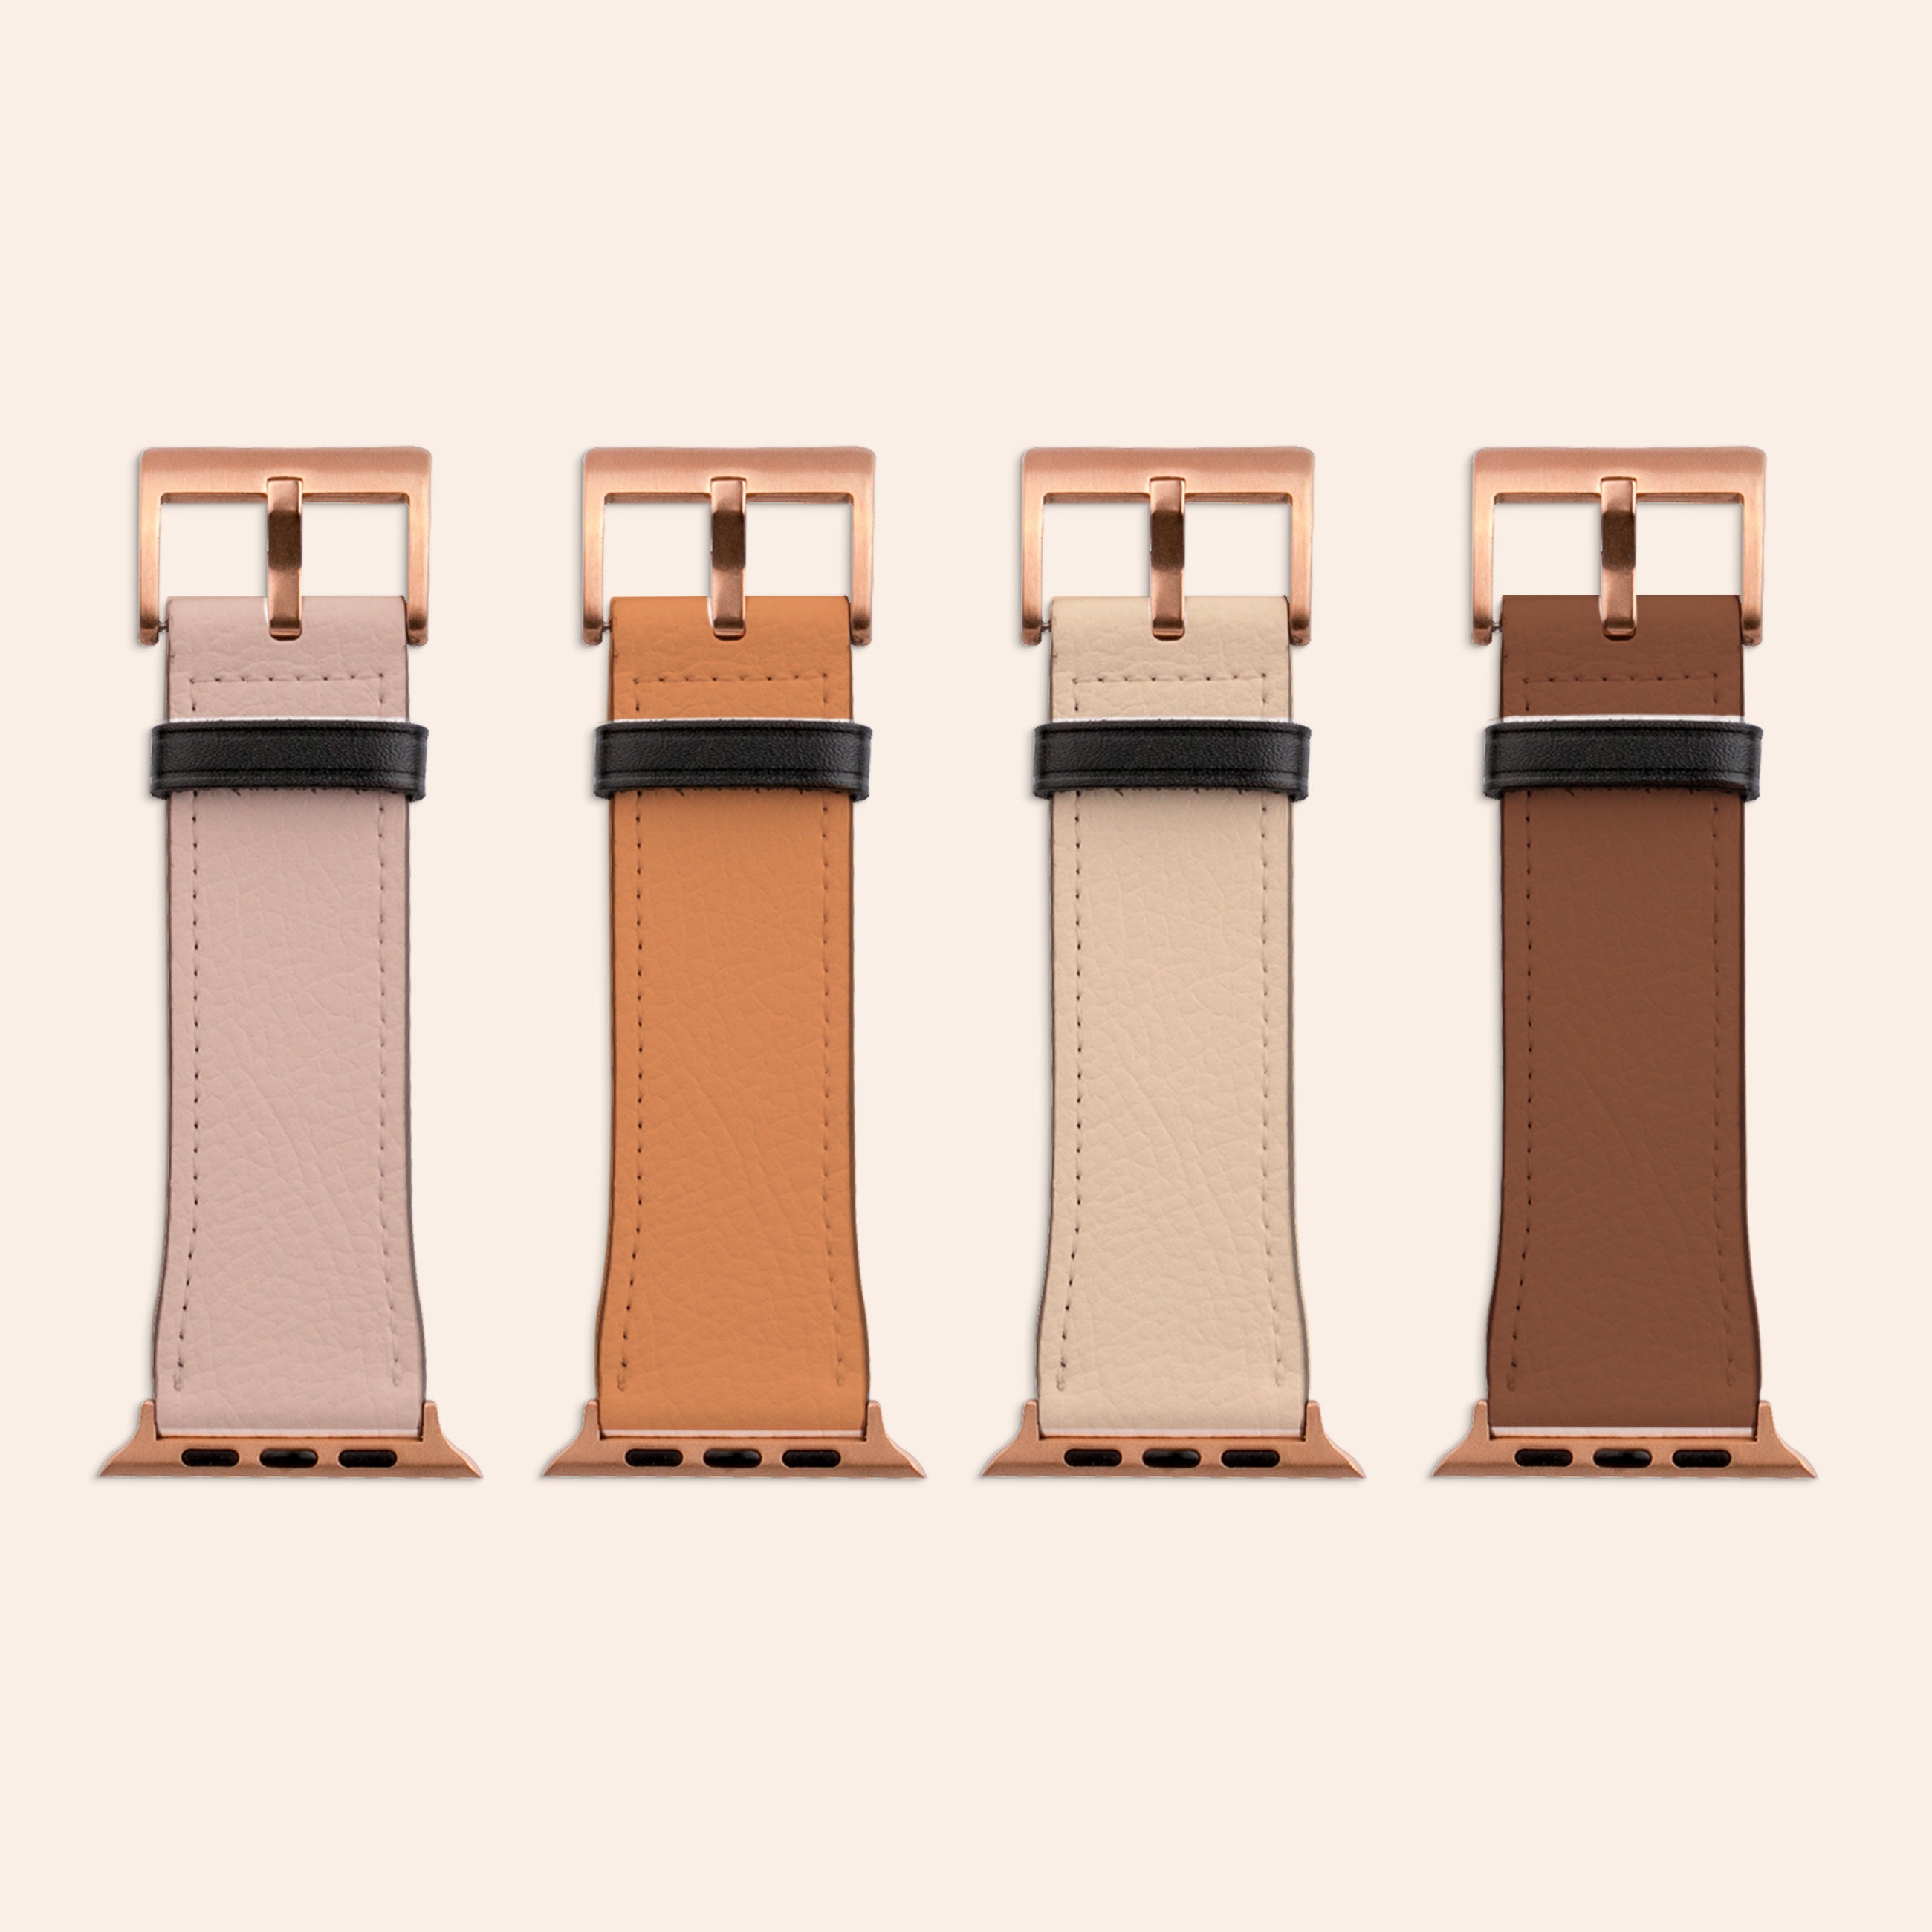 Hermès weaves first-ever apple watch bands in knitted nylon with 3D pattern